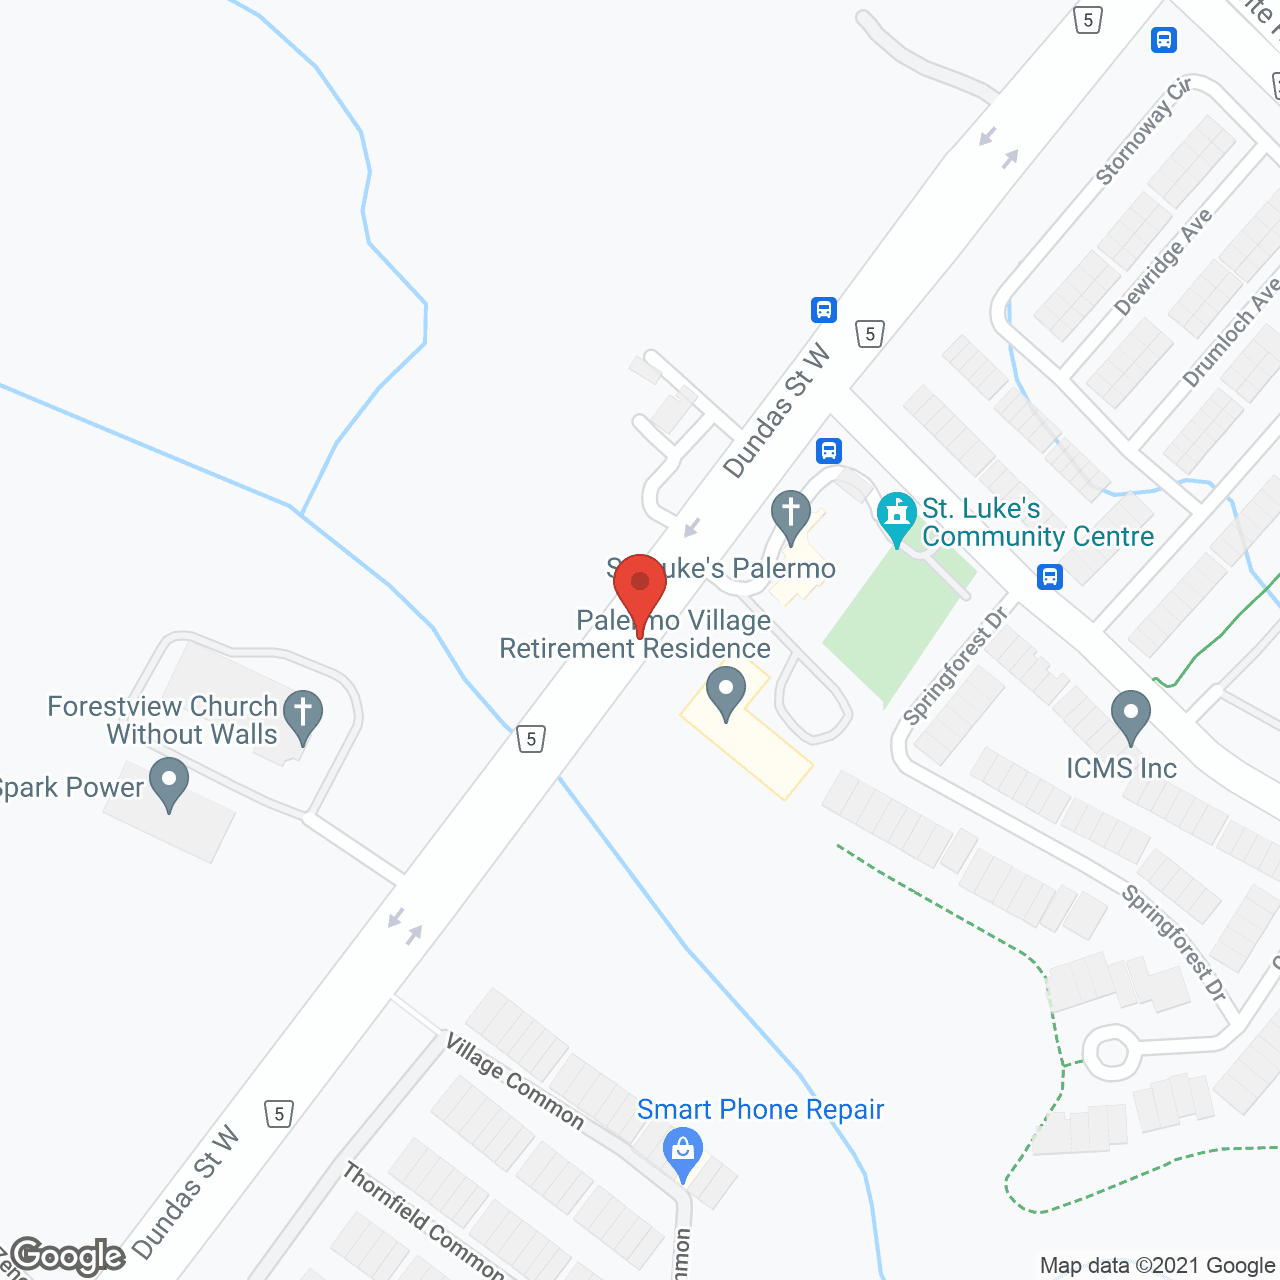 Palermo Village Retirement Residence in google map